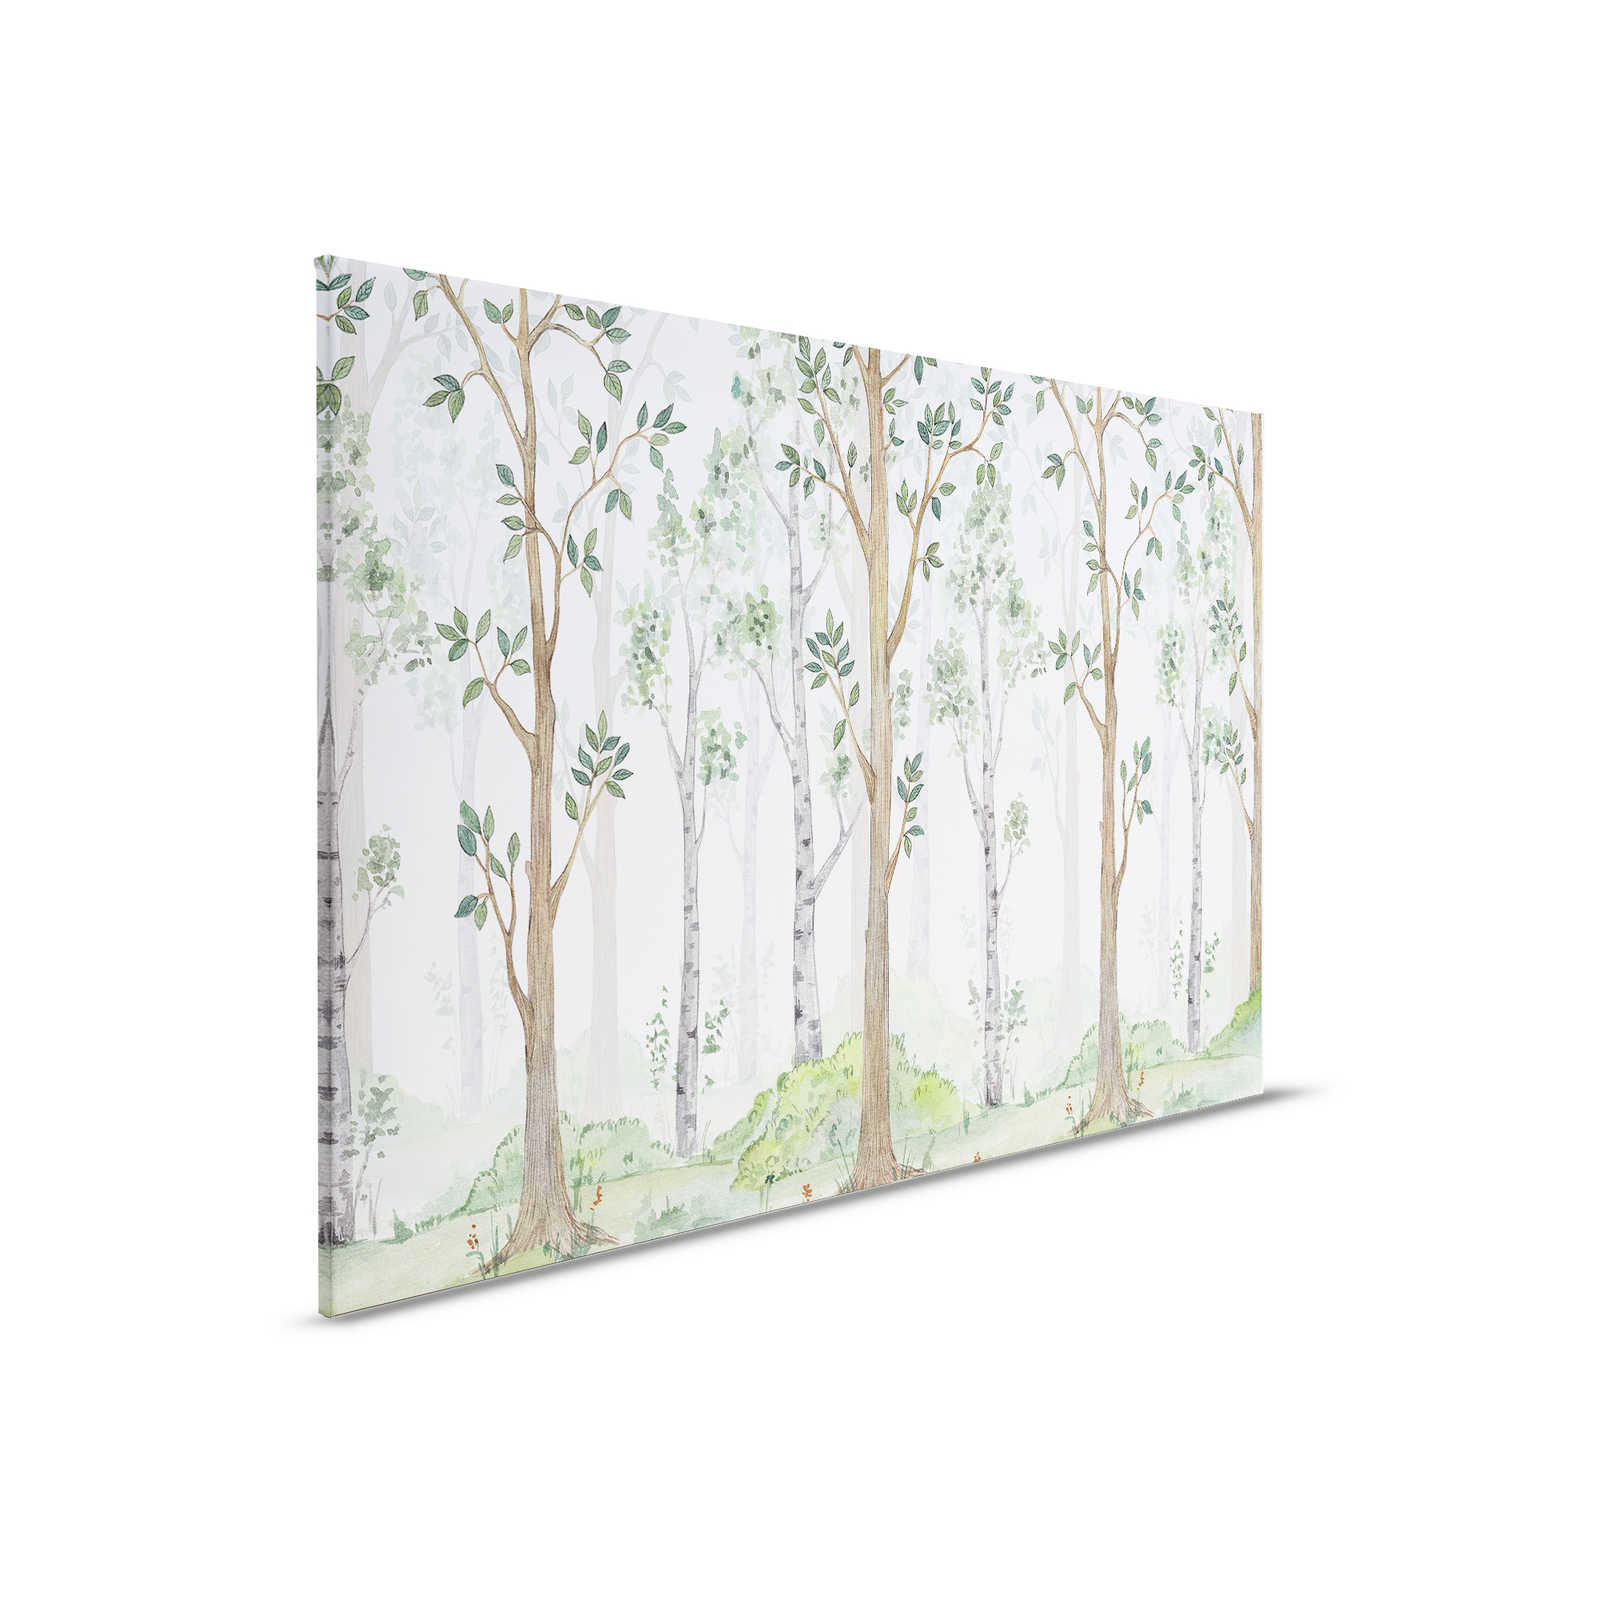         Canvas painting with painted forest for children's room - 0.90 m x 0.60 m
    